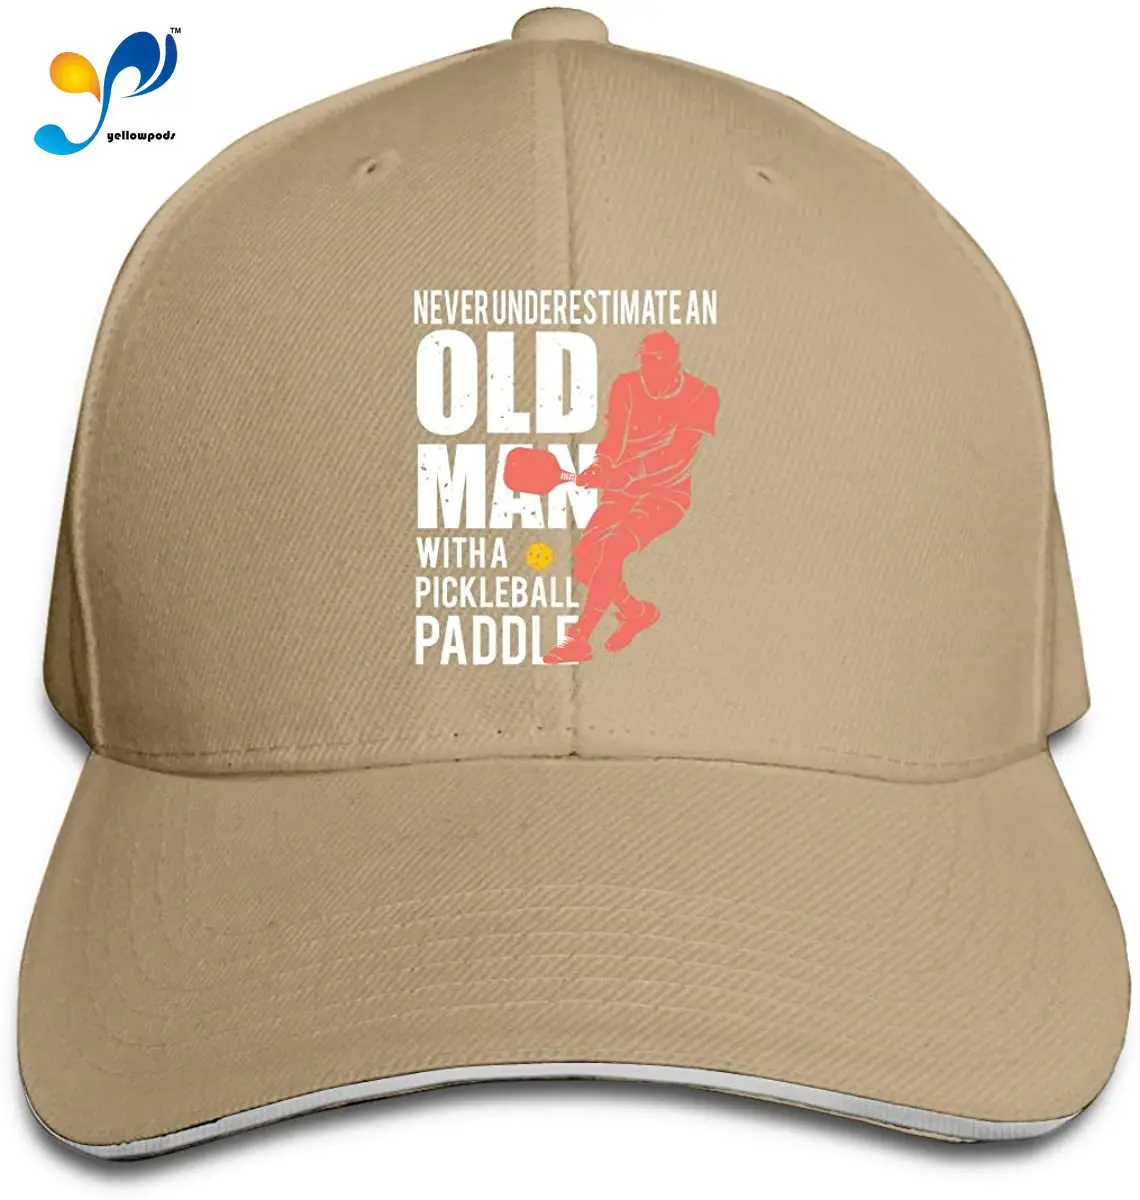 

Never Underestimate An Old Man With A Pickleball Paddle Adjustable Sandwich Cap Baseball Cap Casquette Hat